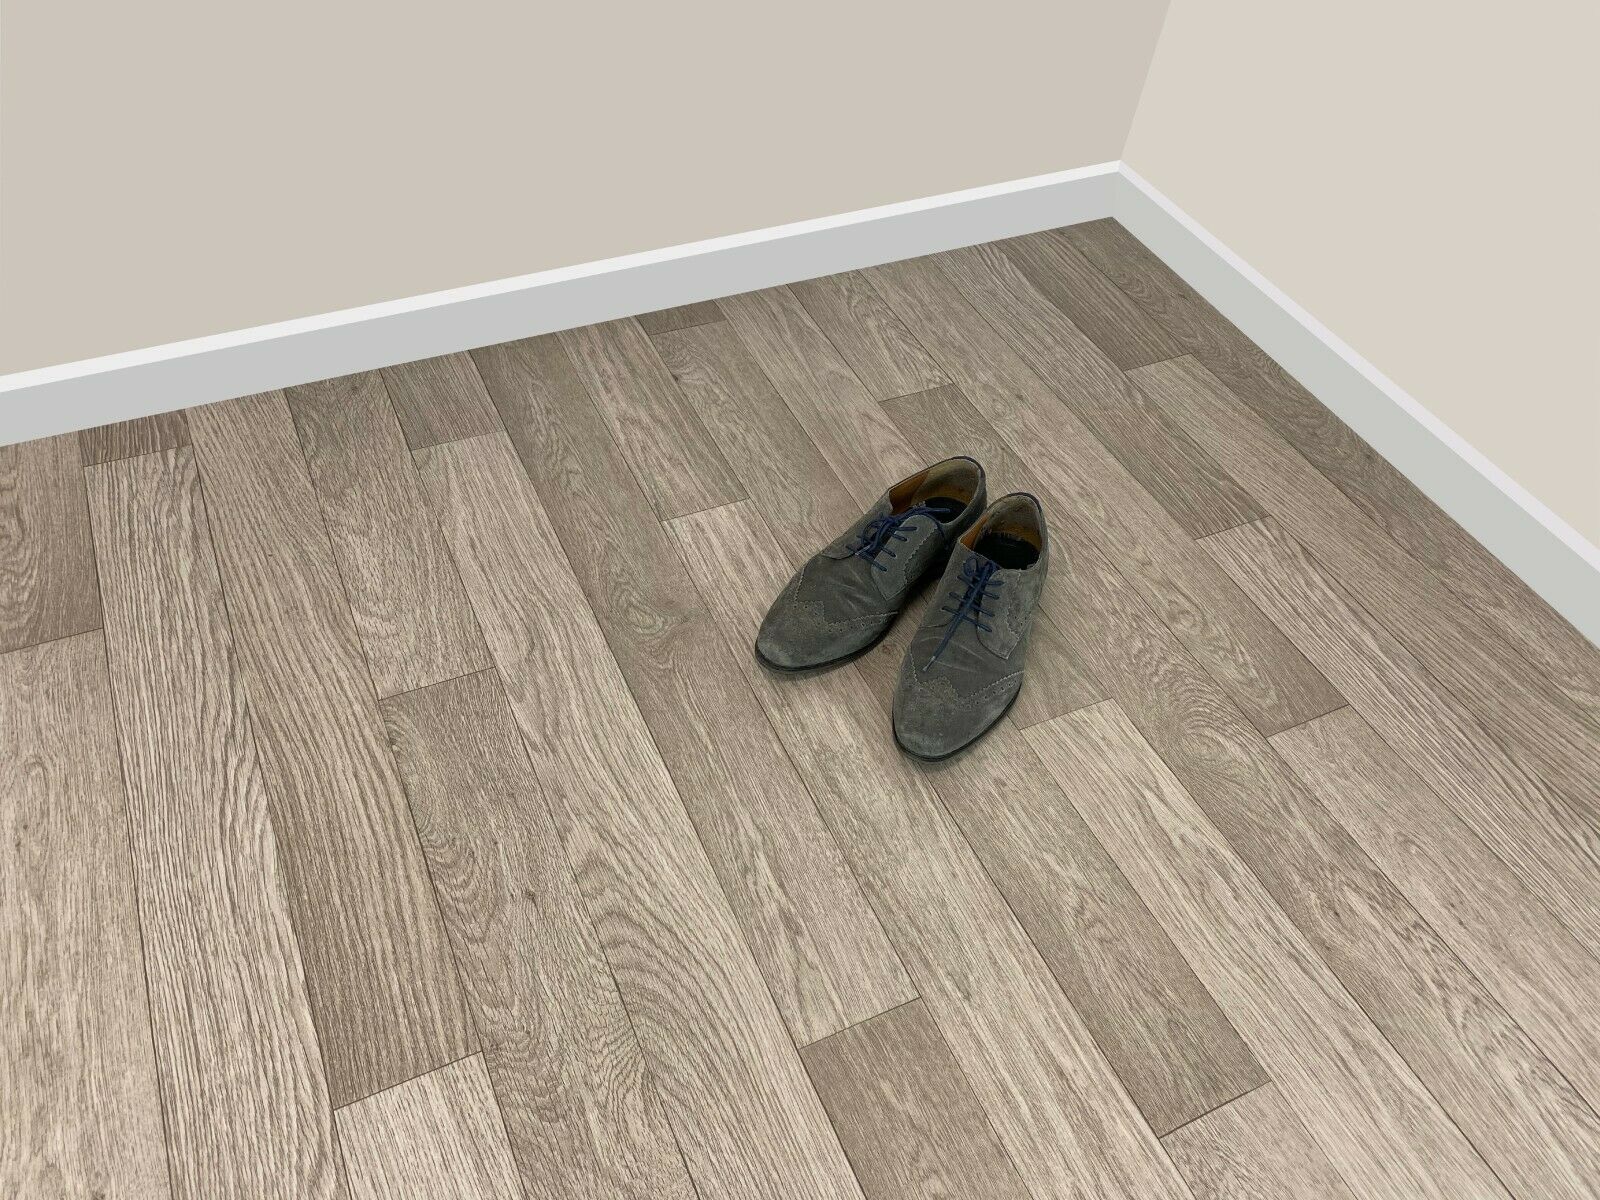 Vinyl Roll Flooring With Pair Of Shoes